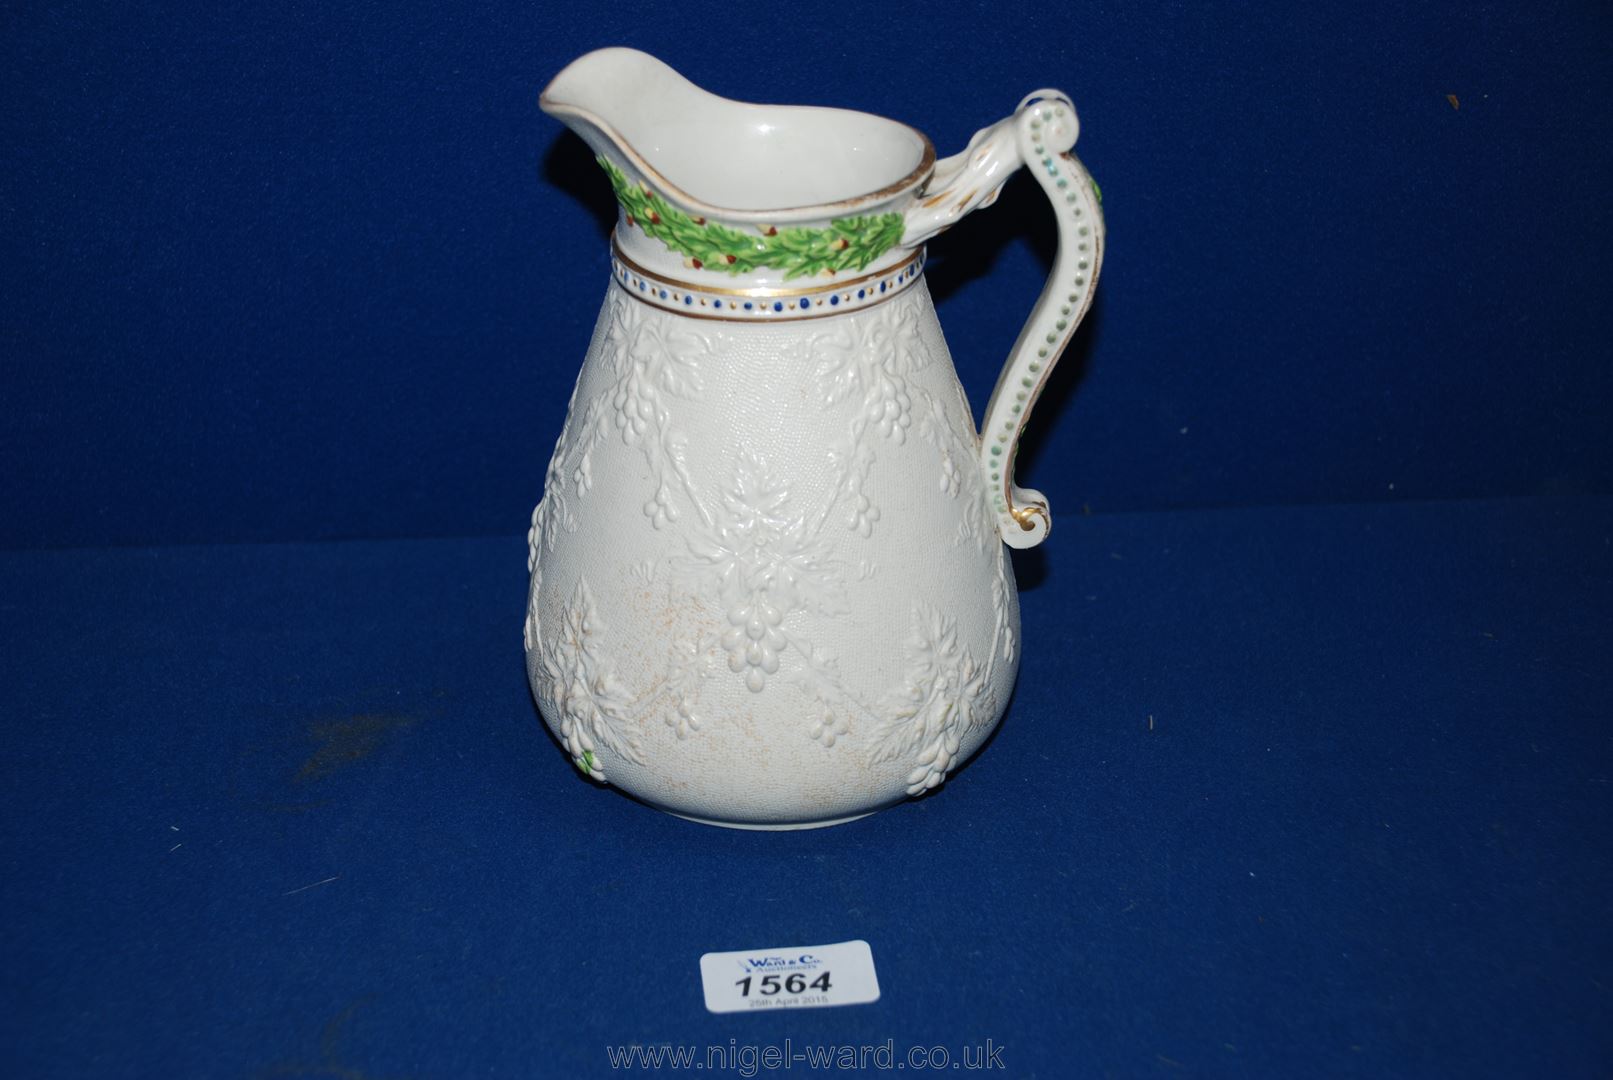 An early Victorian white stoneware Jug, moulded in low relief with vine decoration, coloured hop